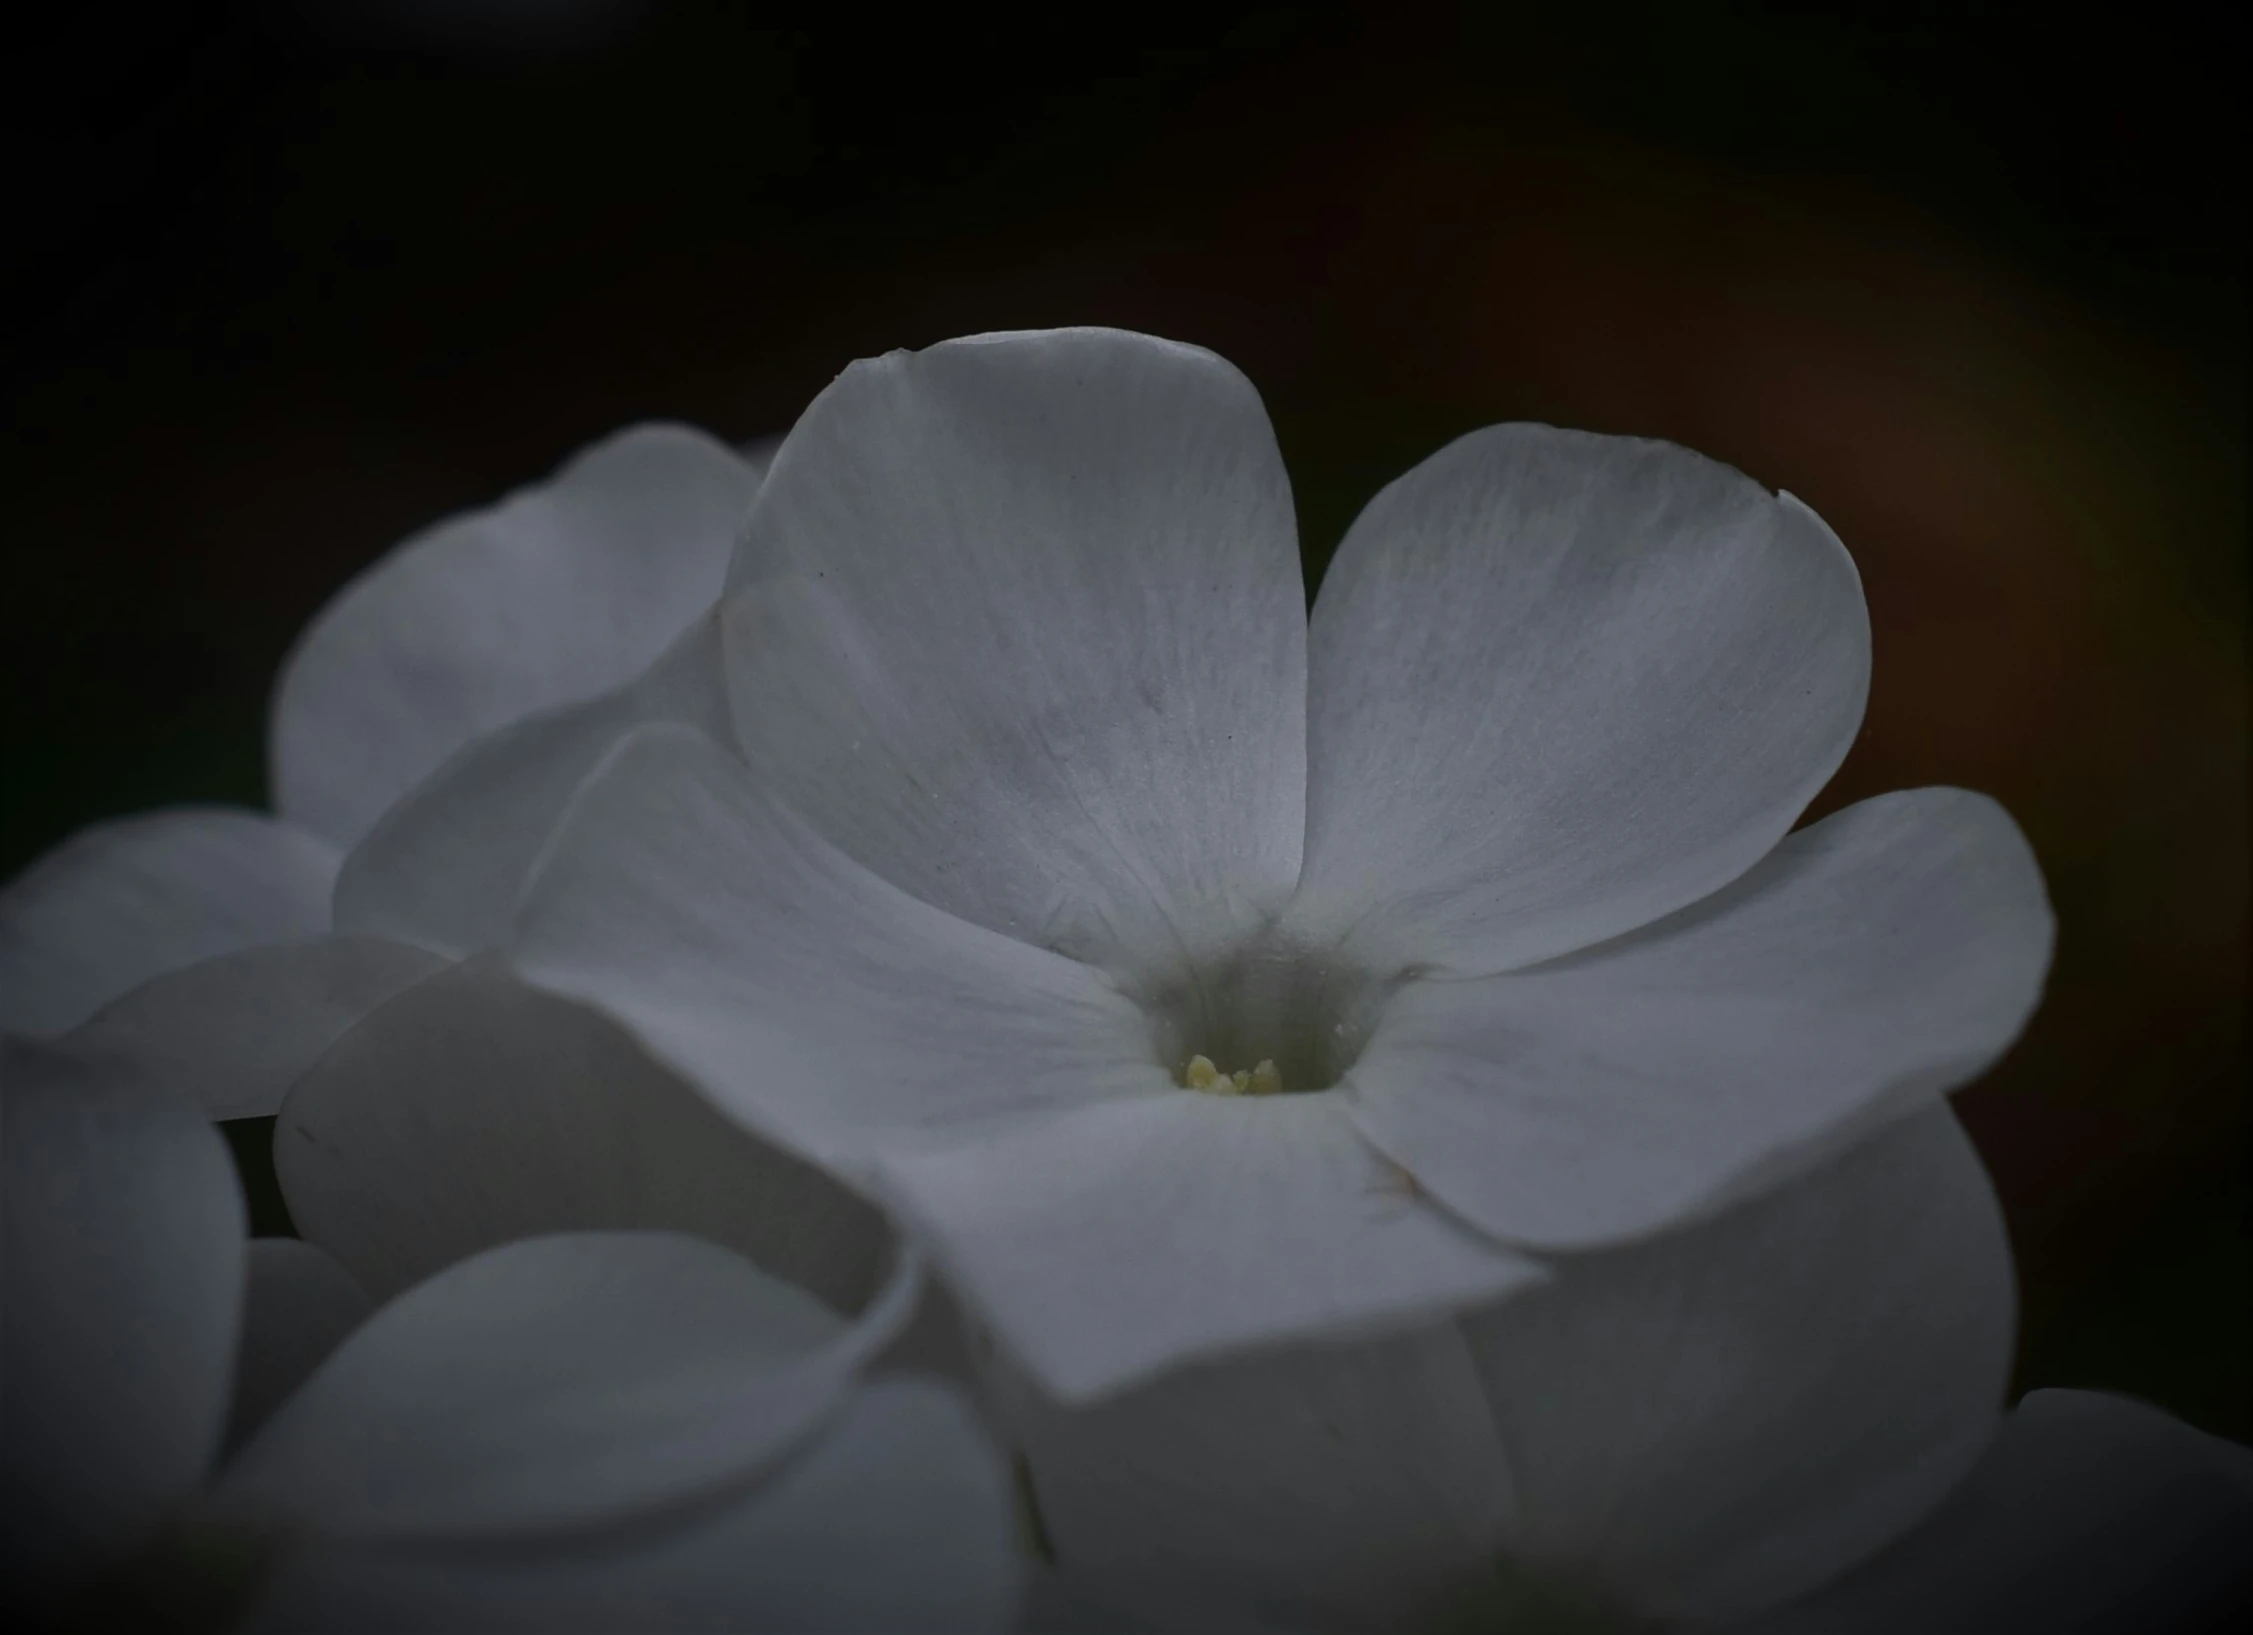 a close up of white flowers that appear to be petals